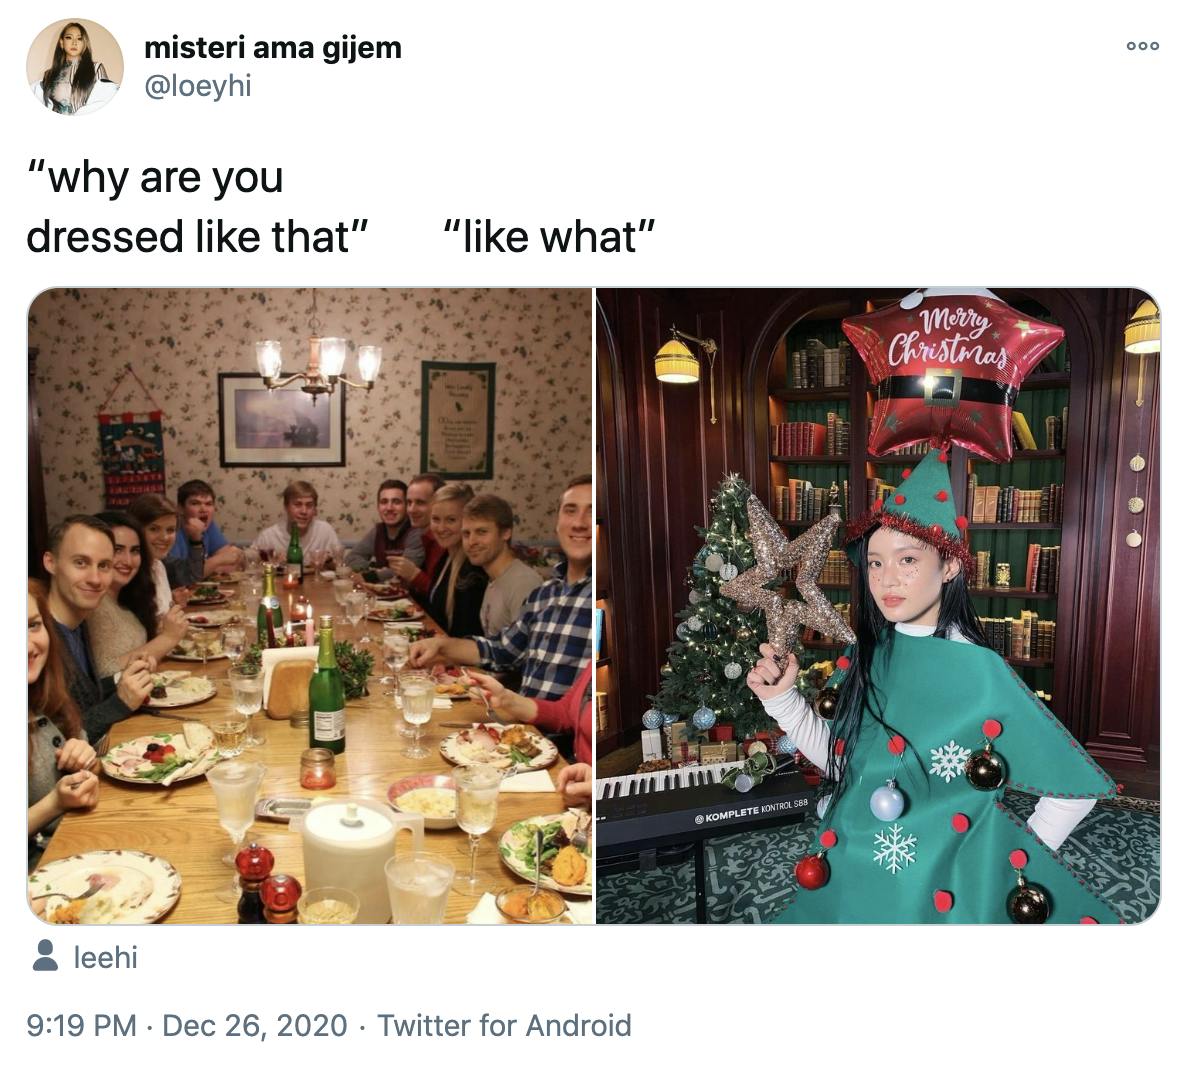 'why are you dressed like that? like what?' a photograph of a white family around a Christmas dinner table all looking at the camera with surprised expressions and a photograph of a woman in a Christmas tree costume, holding a tinsel star next to a keyboard and beneath a red star shaped balloon that had 'merry Christmas' written on it